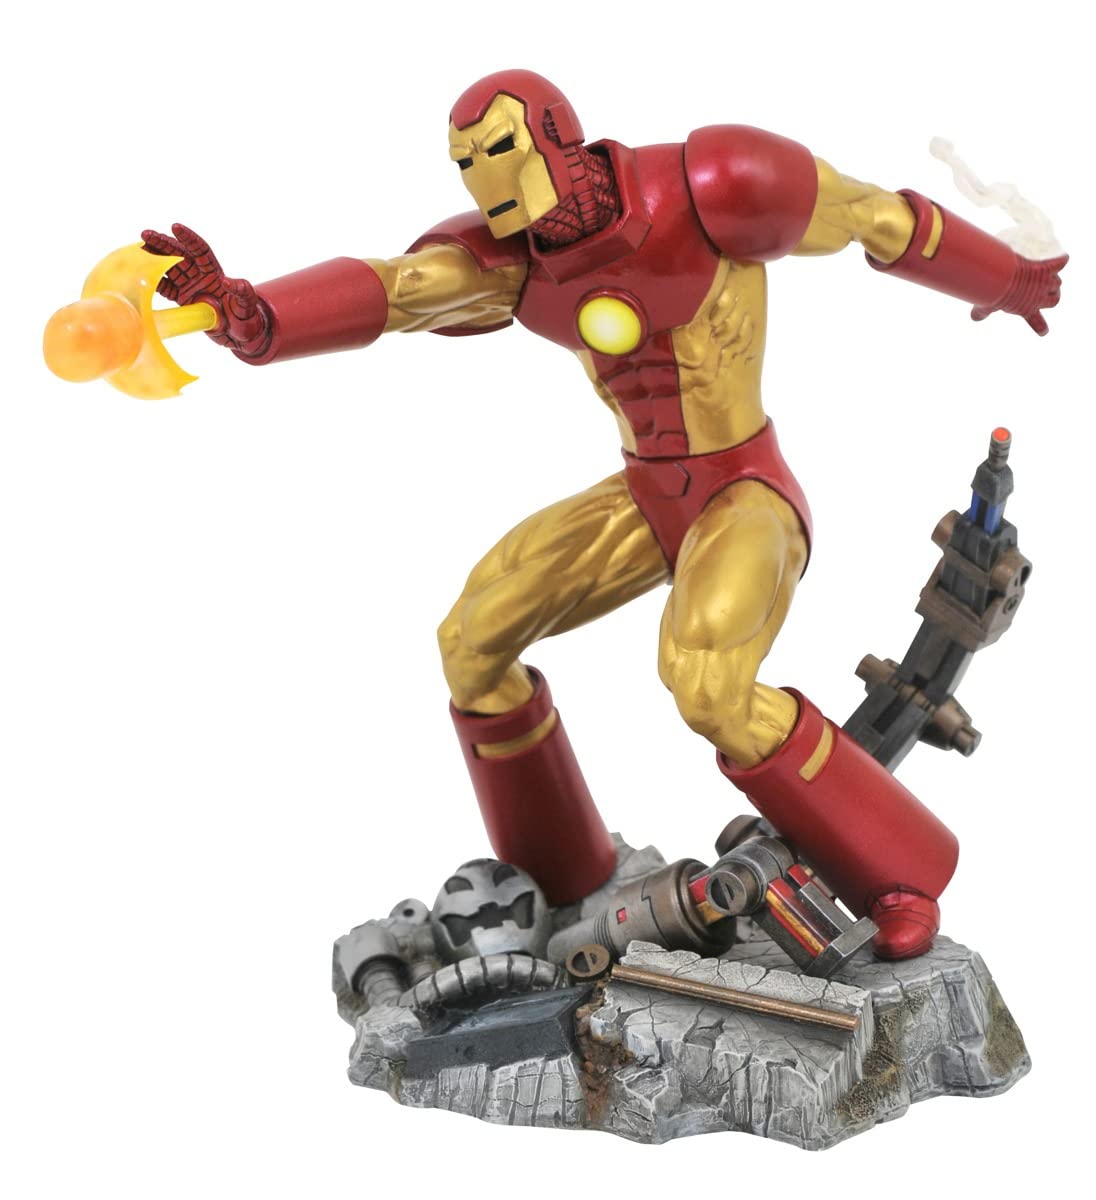 DIAMOND SELECT TOYS Marvel Gallery: Iron Man PVC Statue, Multicolor, 9 inches